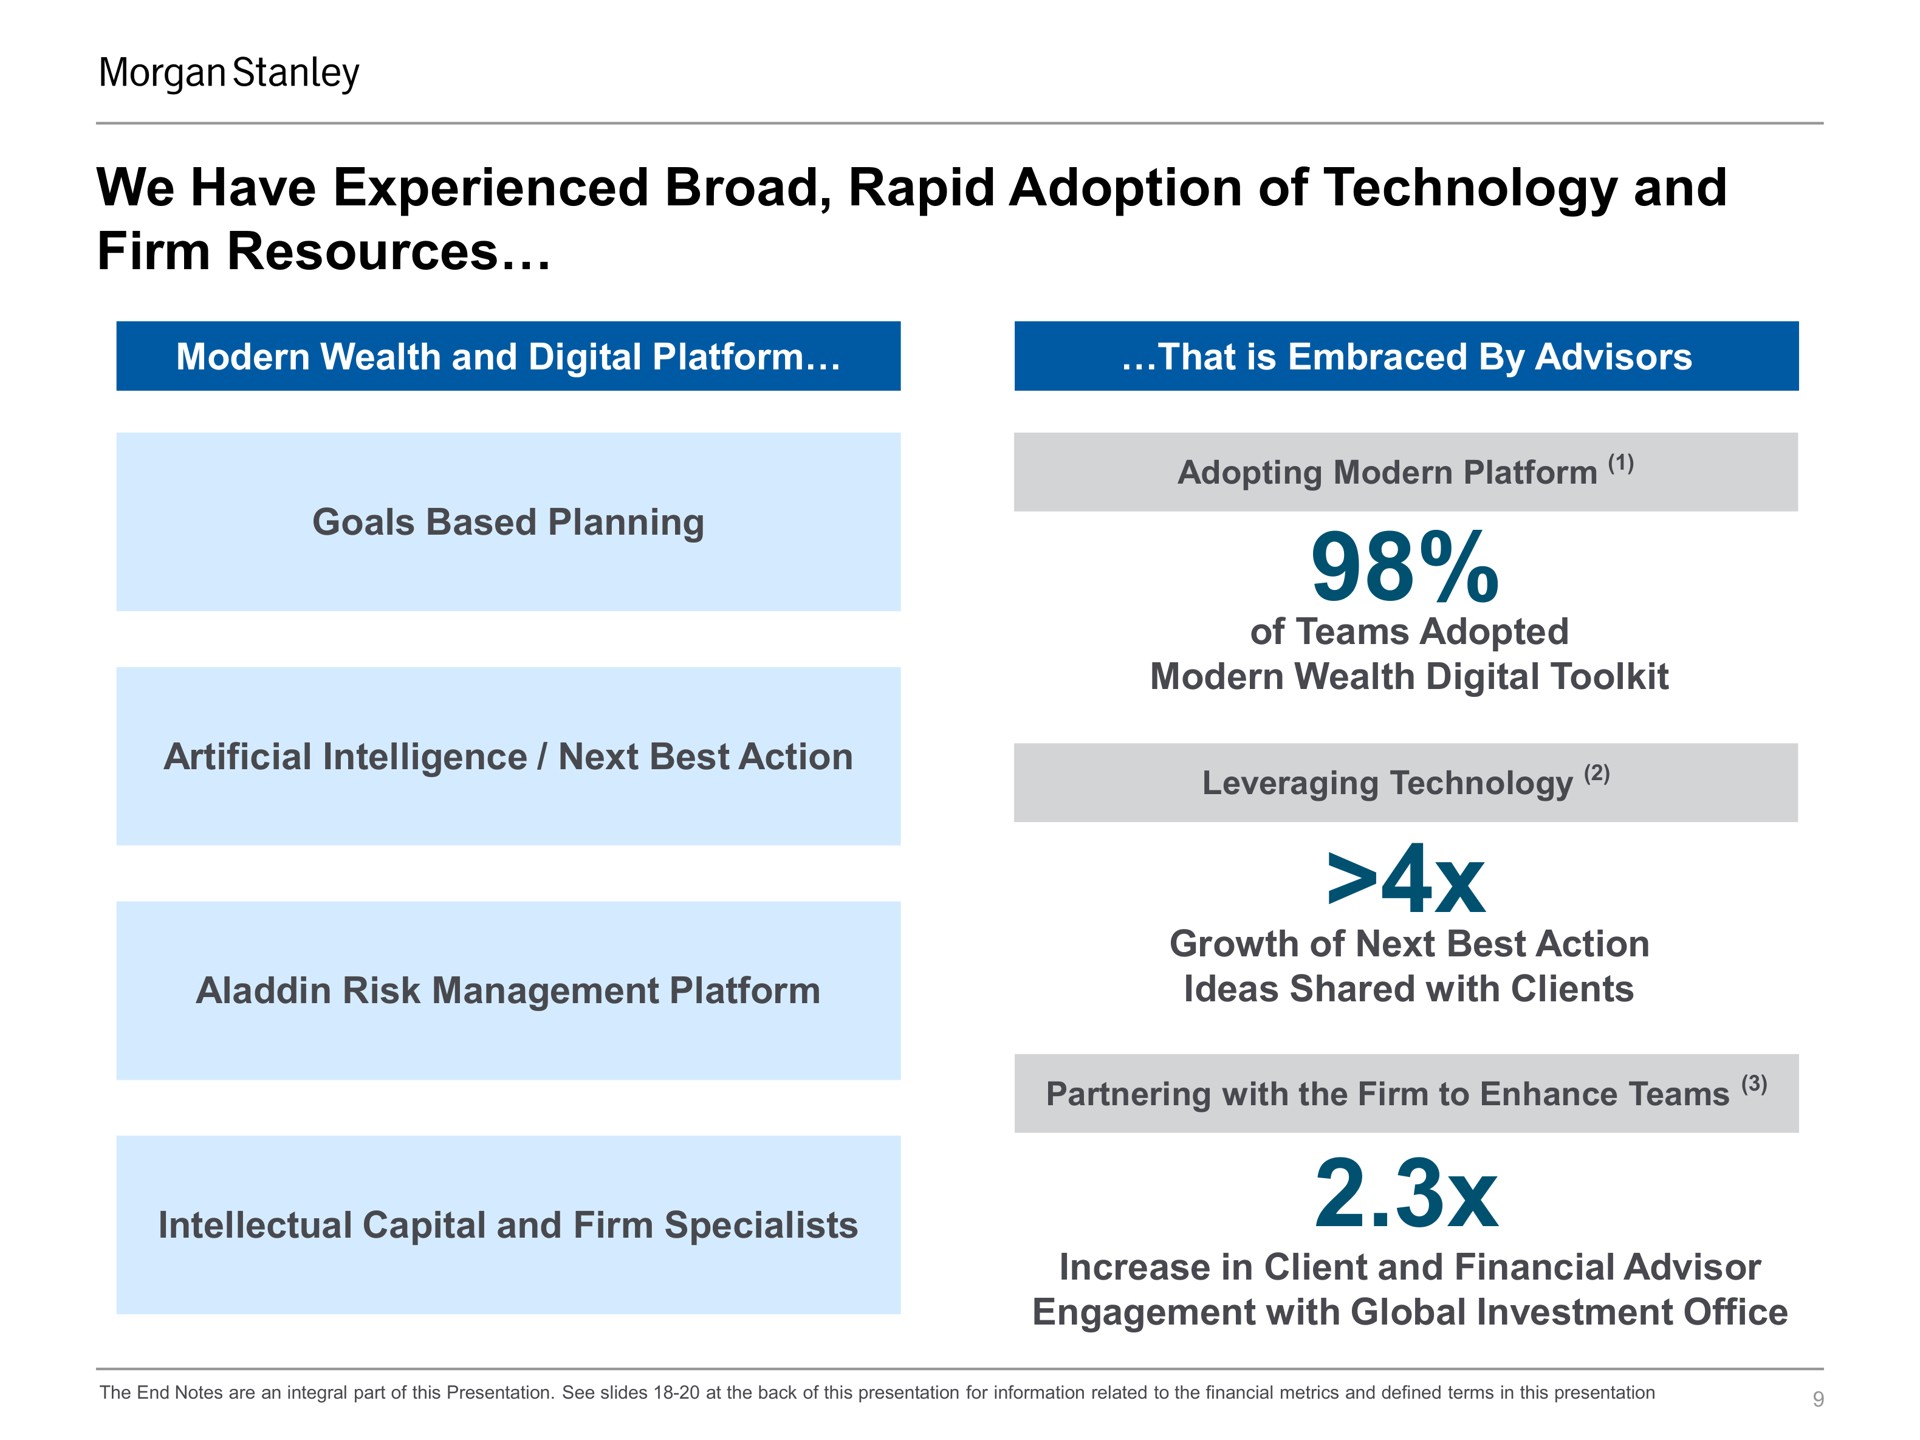 we have experienced broad rapid adoption of technology and firm resources | Morgan Stanley